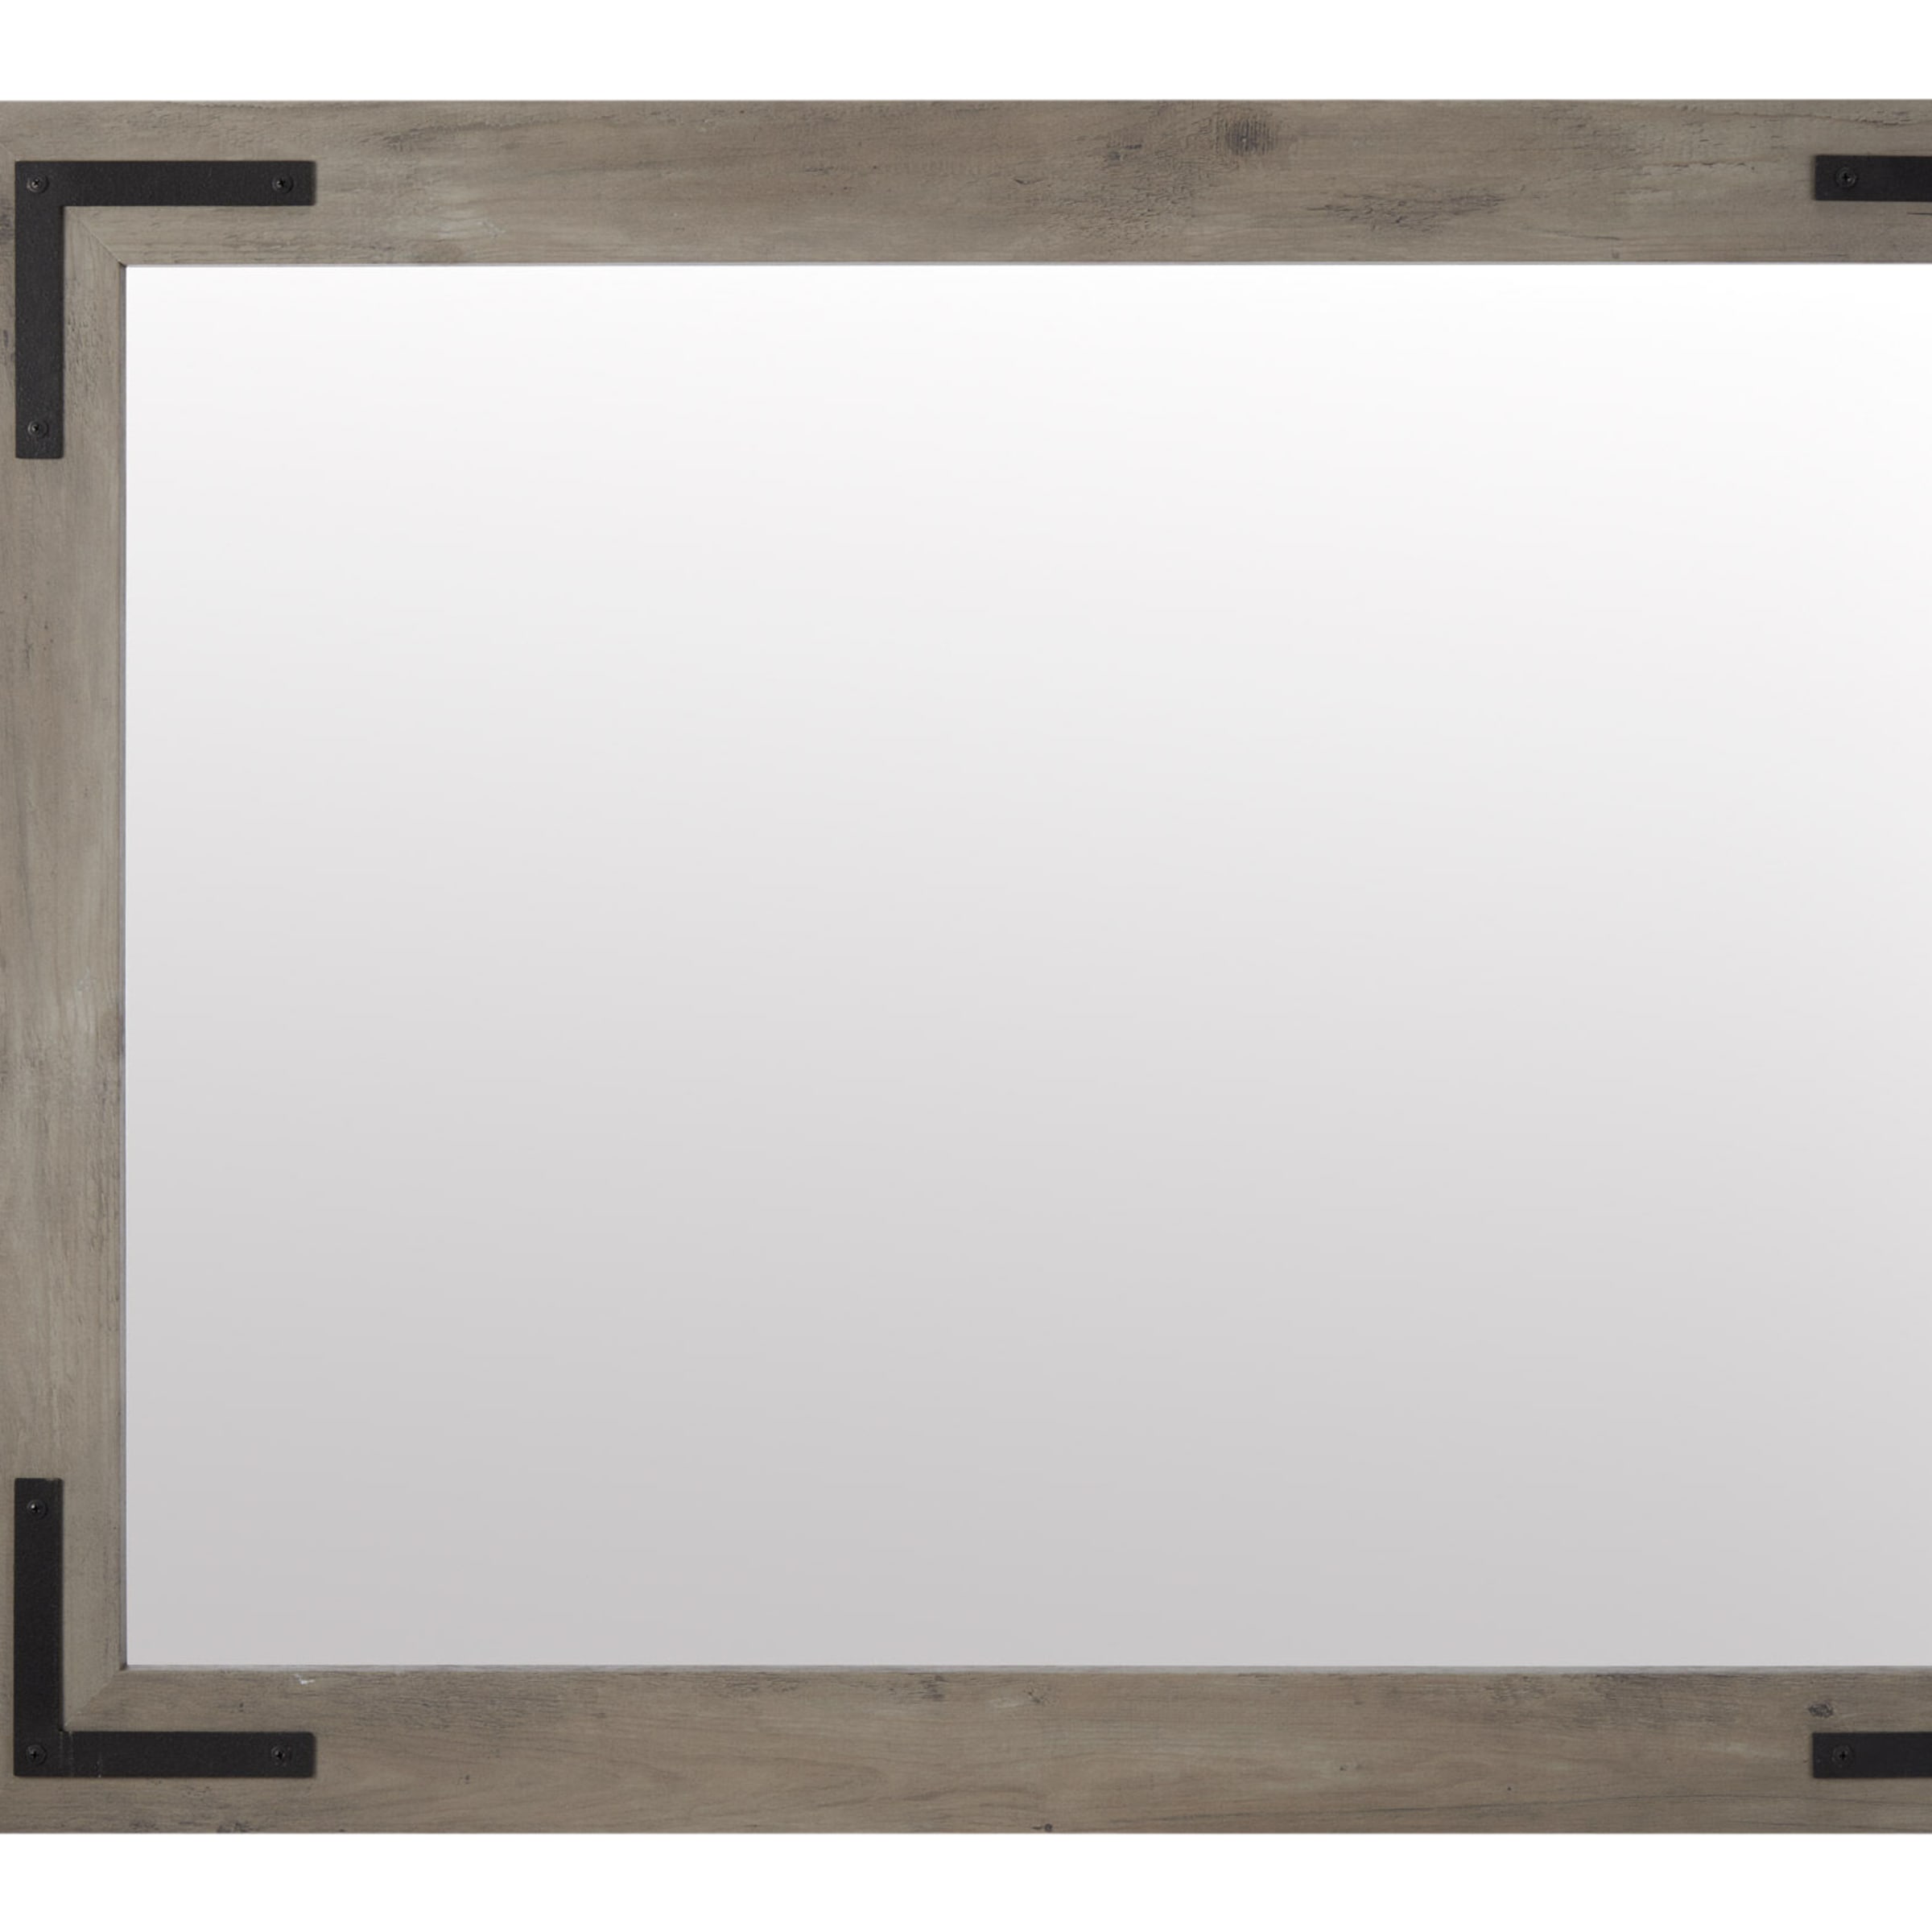 Wood And Metal Framed Mirror Bouclair Com, How To Add Metal Frame Mirror